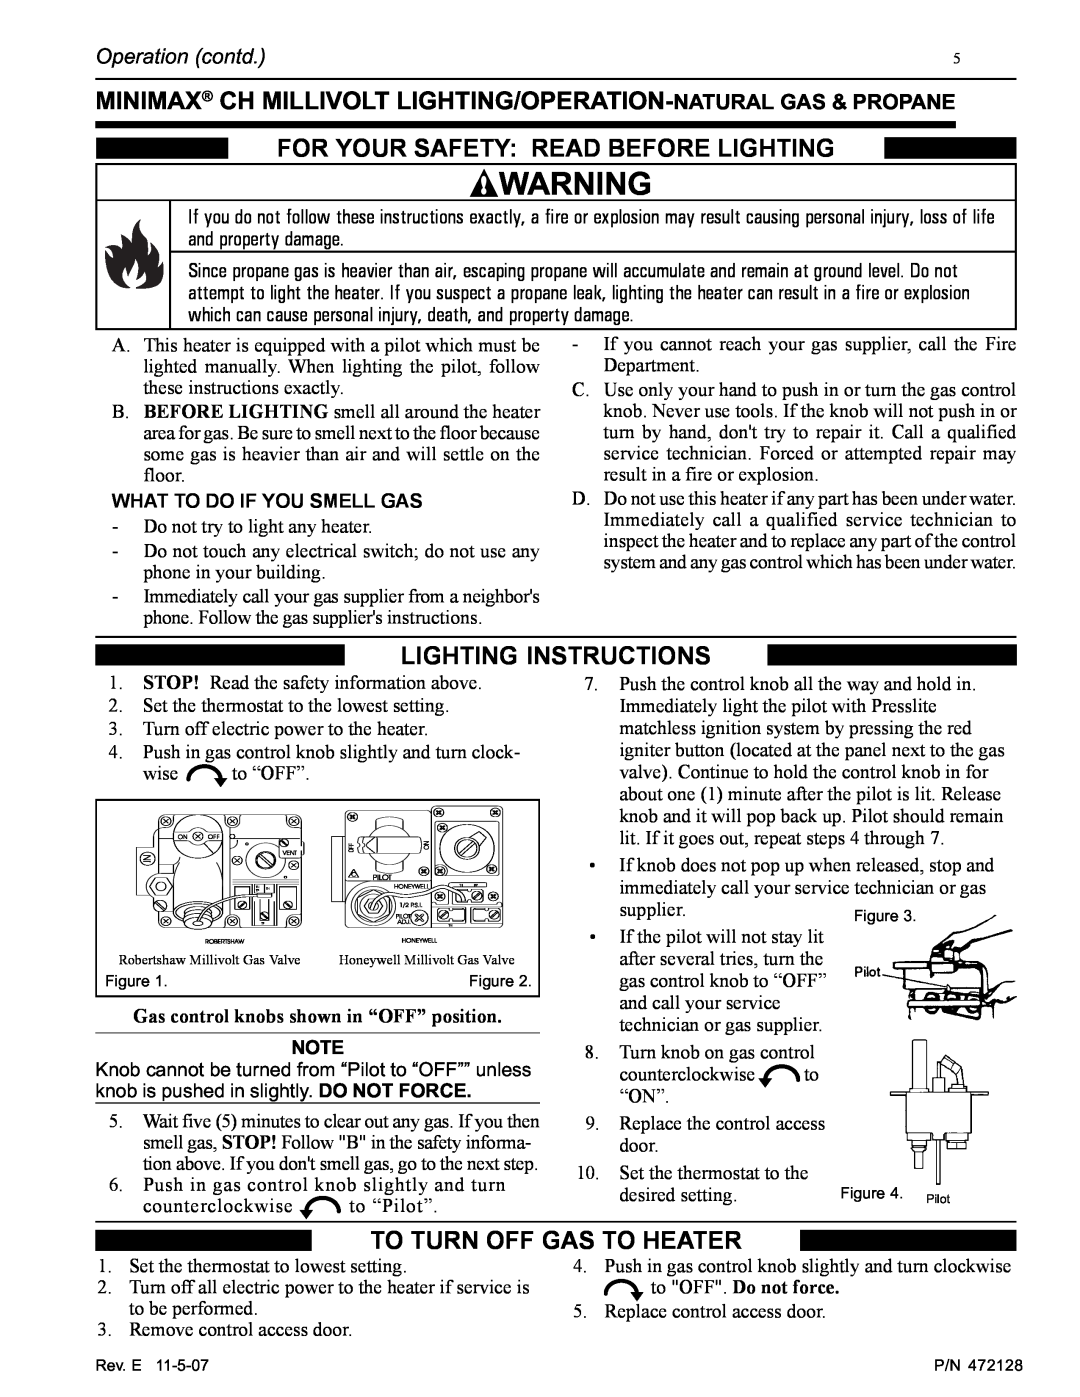 Pentair Hot Tub manual Minimax Ch Millivolt Lighting/Operation-Natural Gas & Propane, For Your Safety Read Before Lighting 